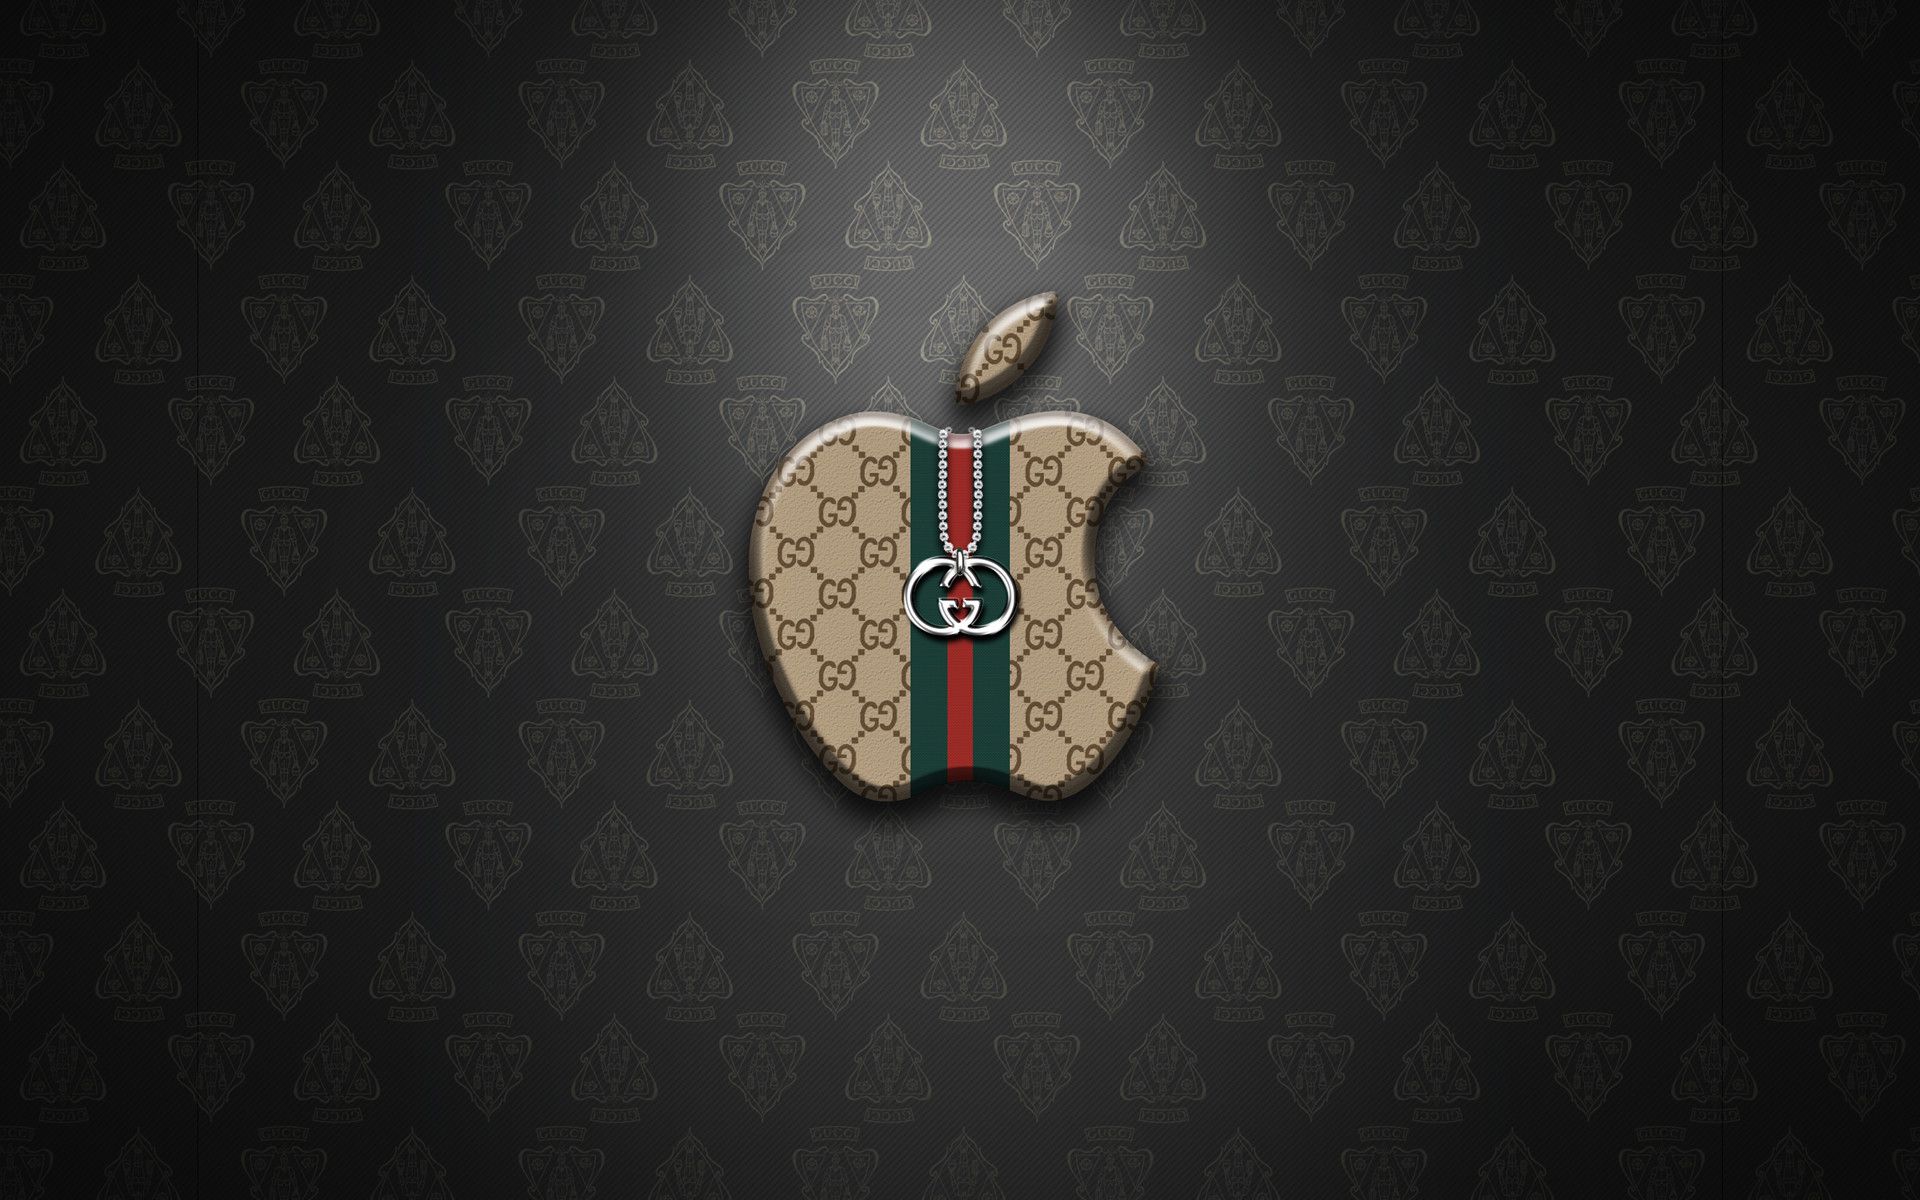 Free download Gucci X Supreme Wallpapers Top Free Gucci X Supreme  Backgrounds [1080x1920] for your Desktop, Mobile & Tablet, Explore 48+ Gucci  iPhone Wallpaper Supreme